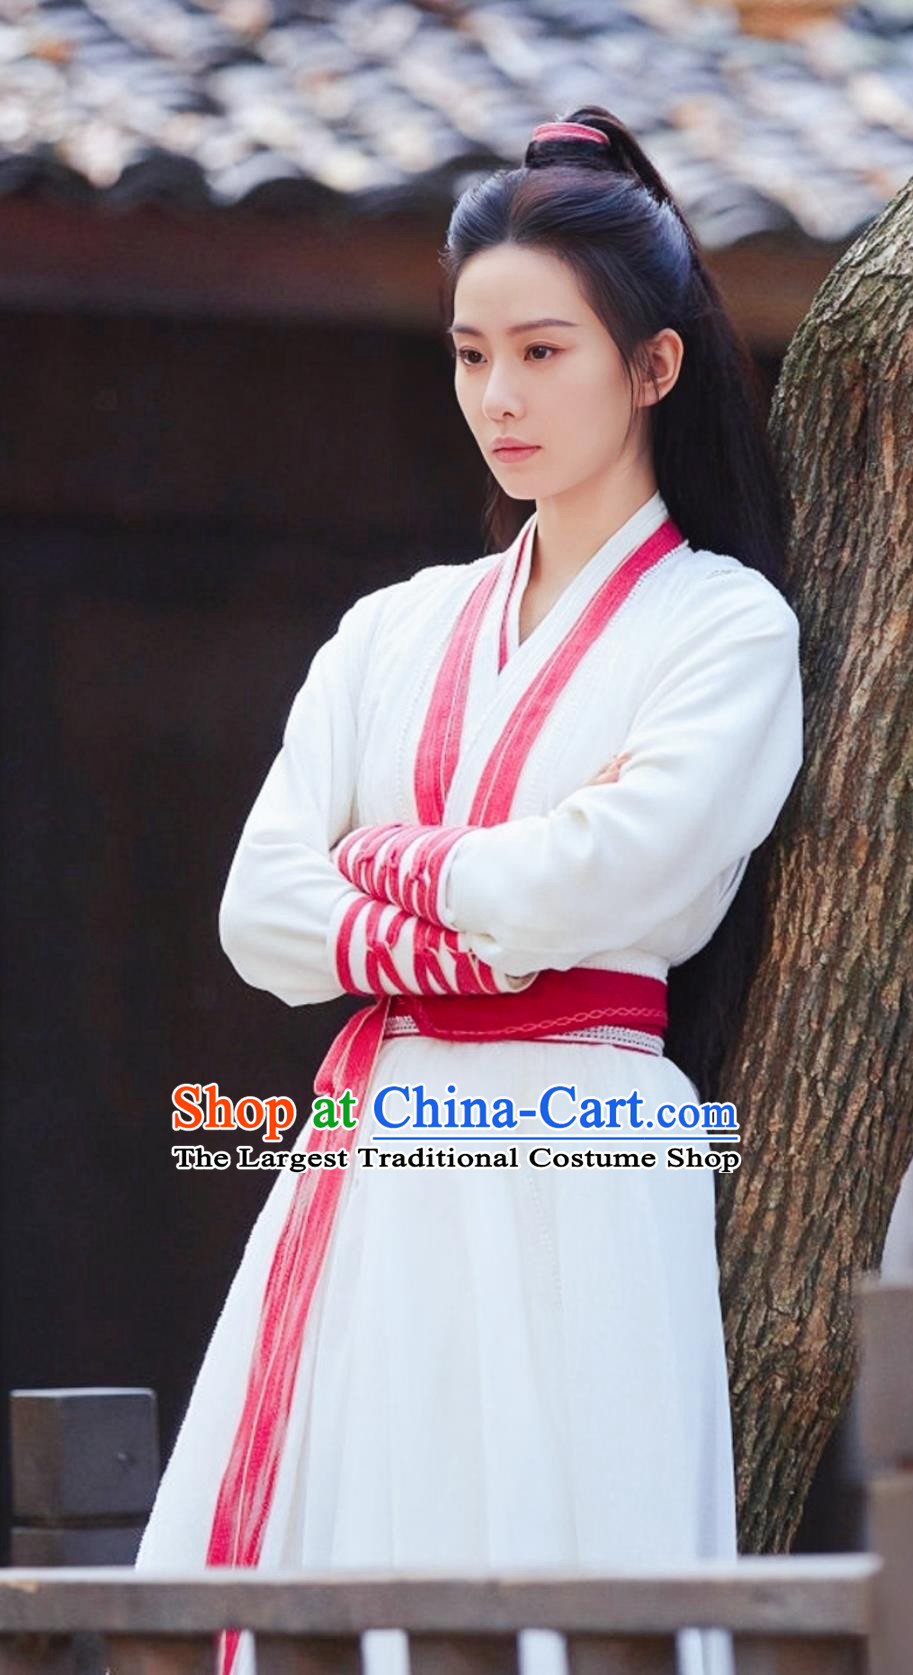 Ancient Chinese Female Assassin Costume China 2023 Wuxia TV Series A Journey To Love Swordswoman Ren Ru Yi White Dress